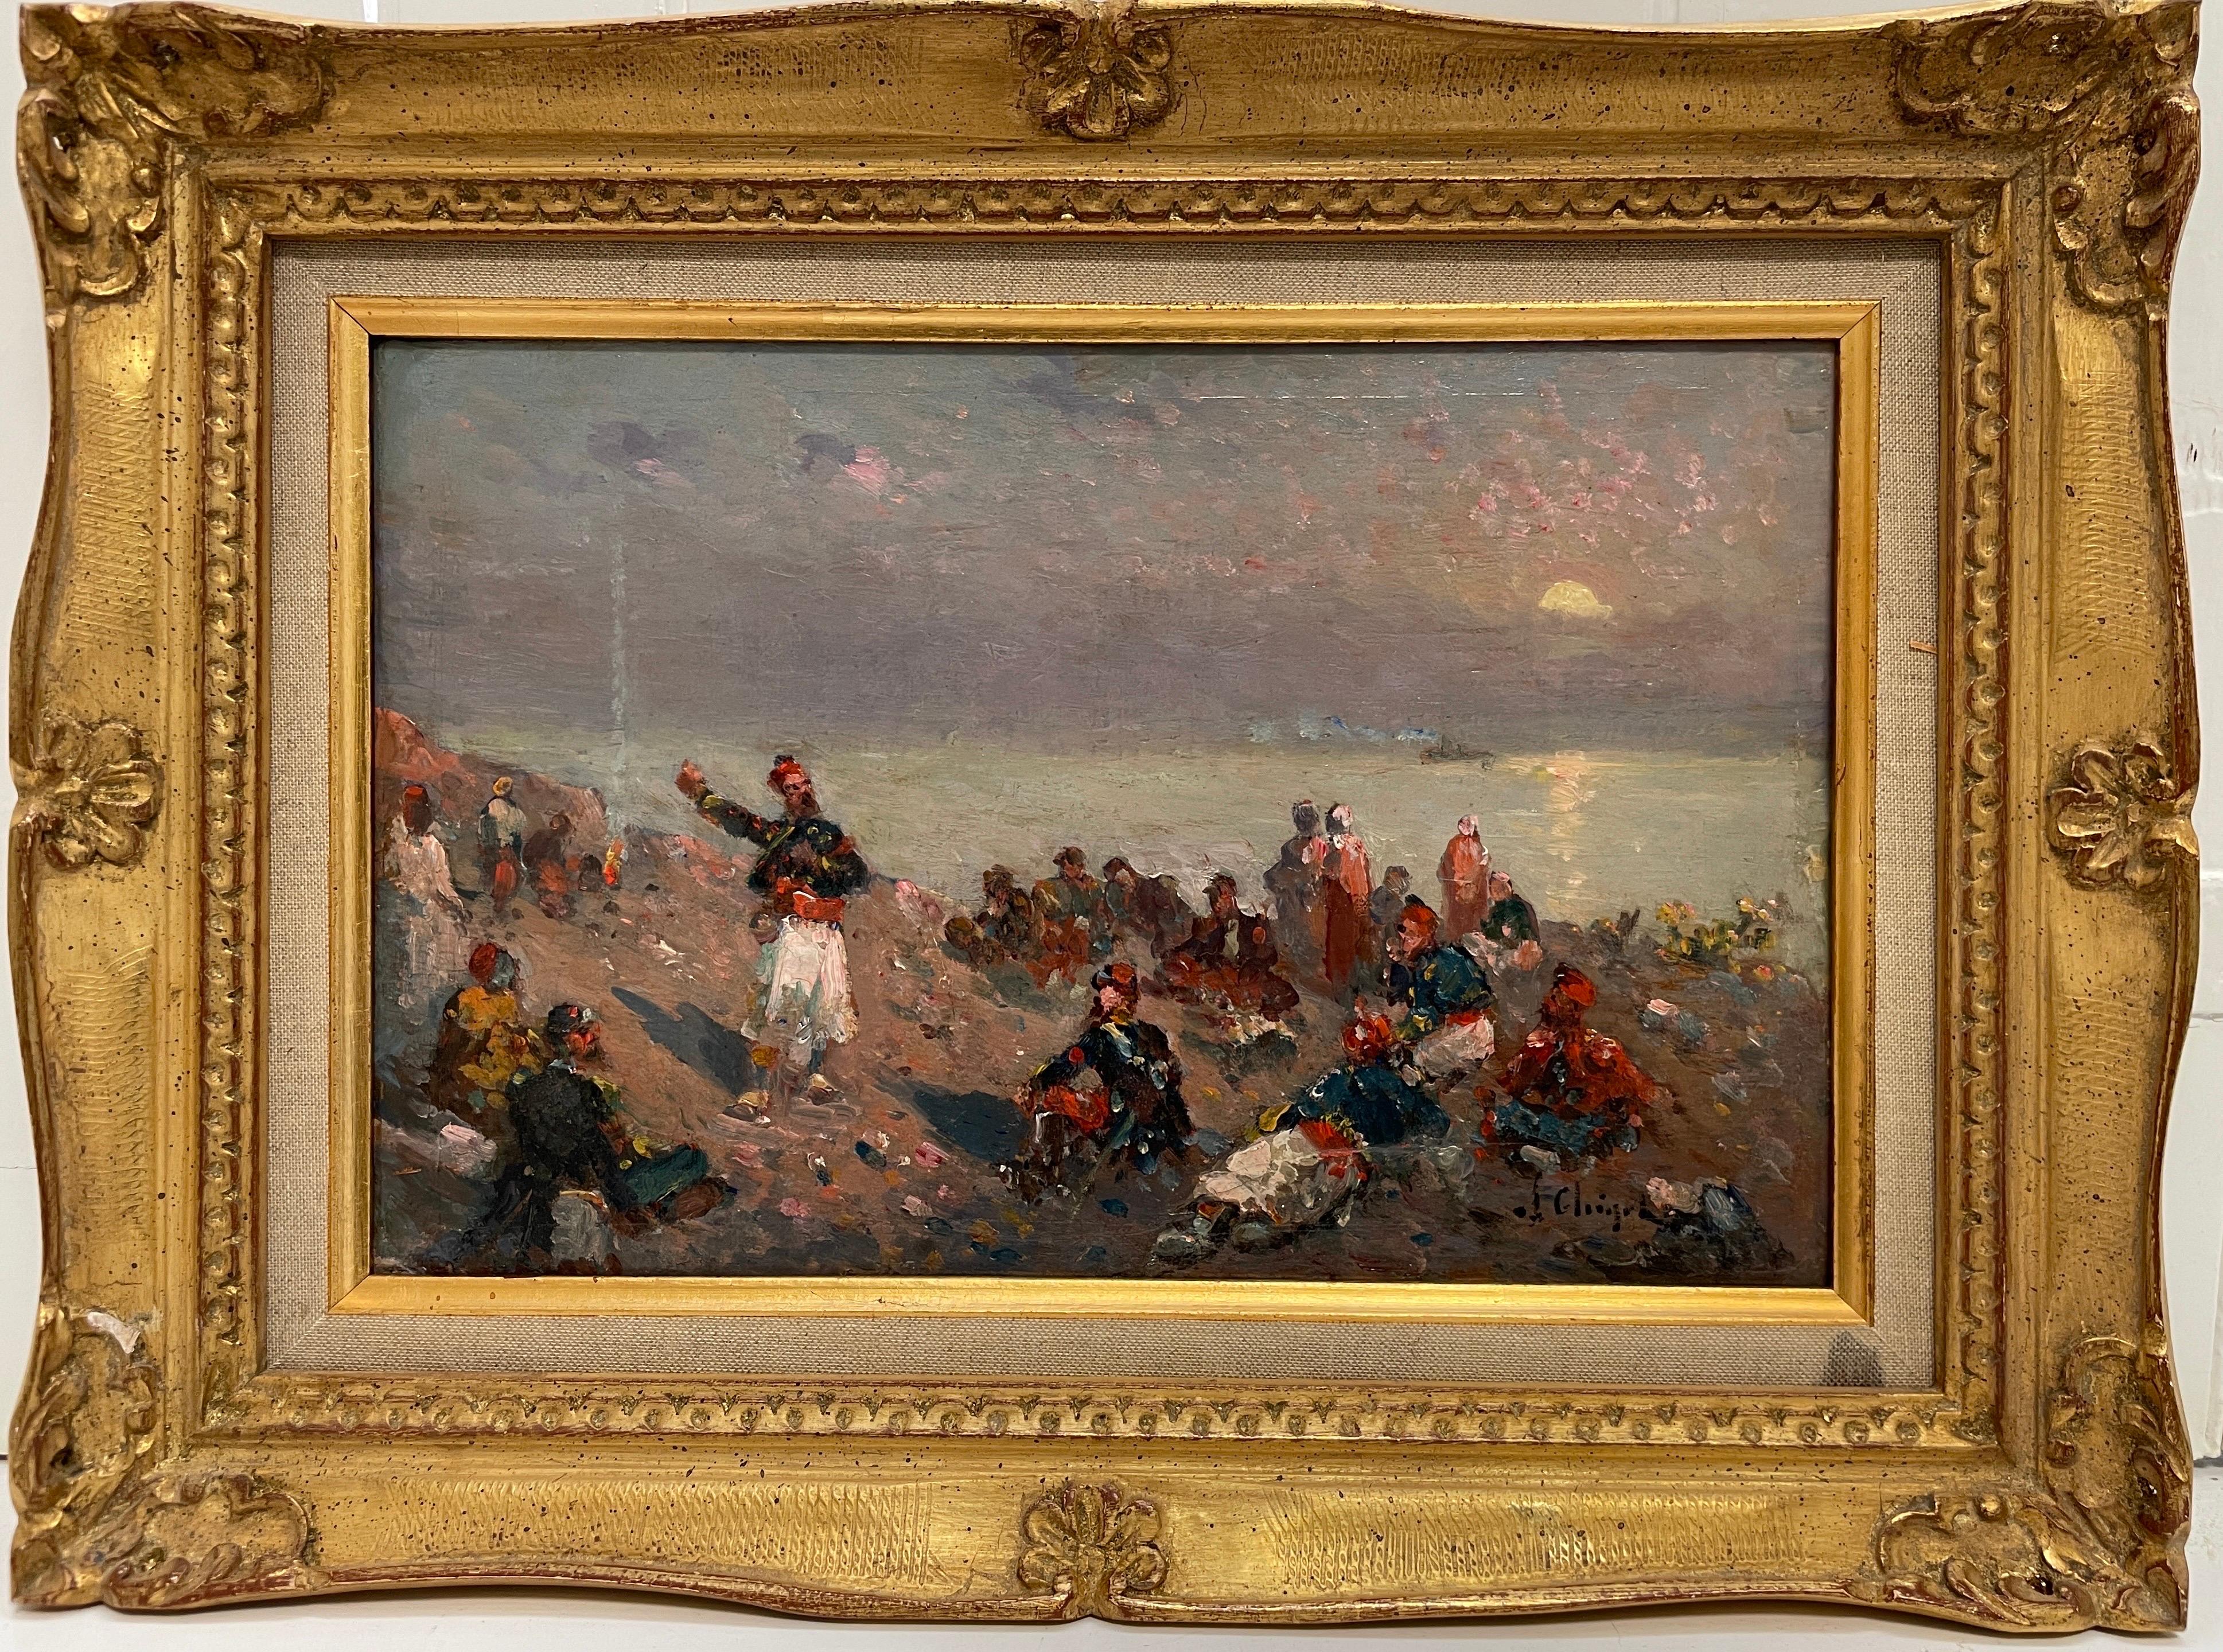 Alphonse Chigot Landscape Painting - 19th Century French Impressionist Oil Soldiers Resting by Camp Fire Sunset Sea